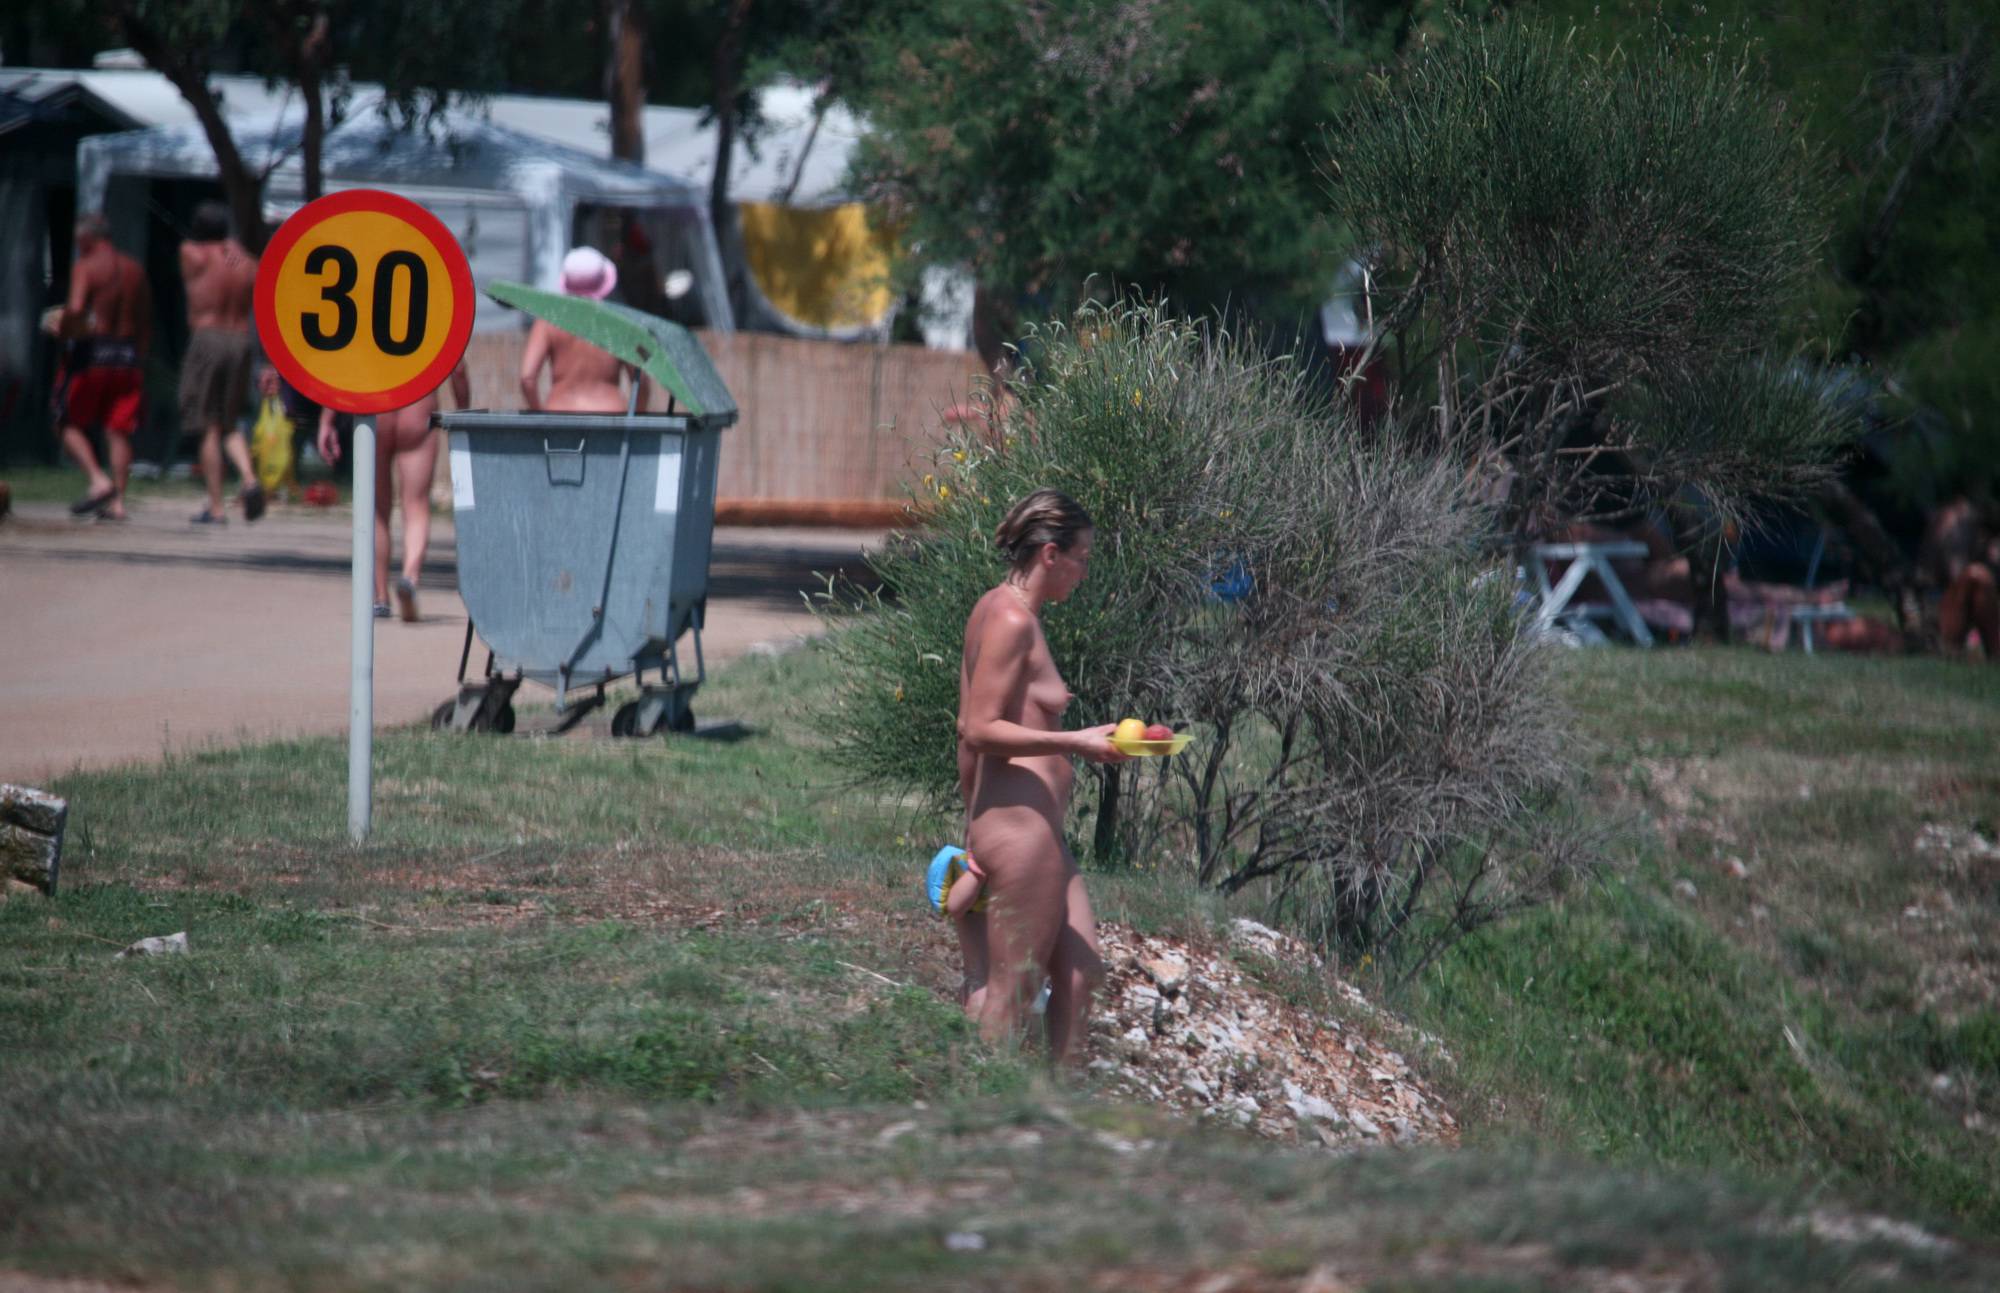 Packup and Nudists Leaving - 2